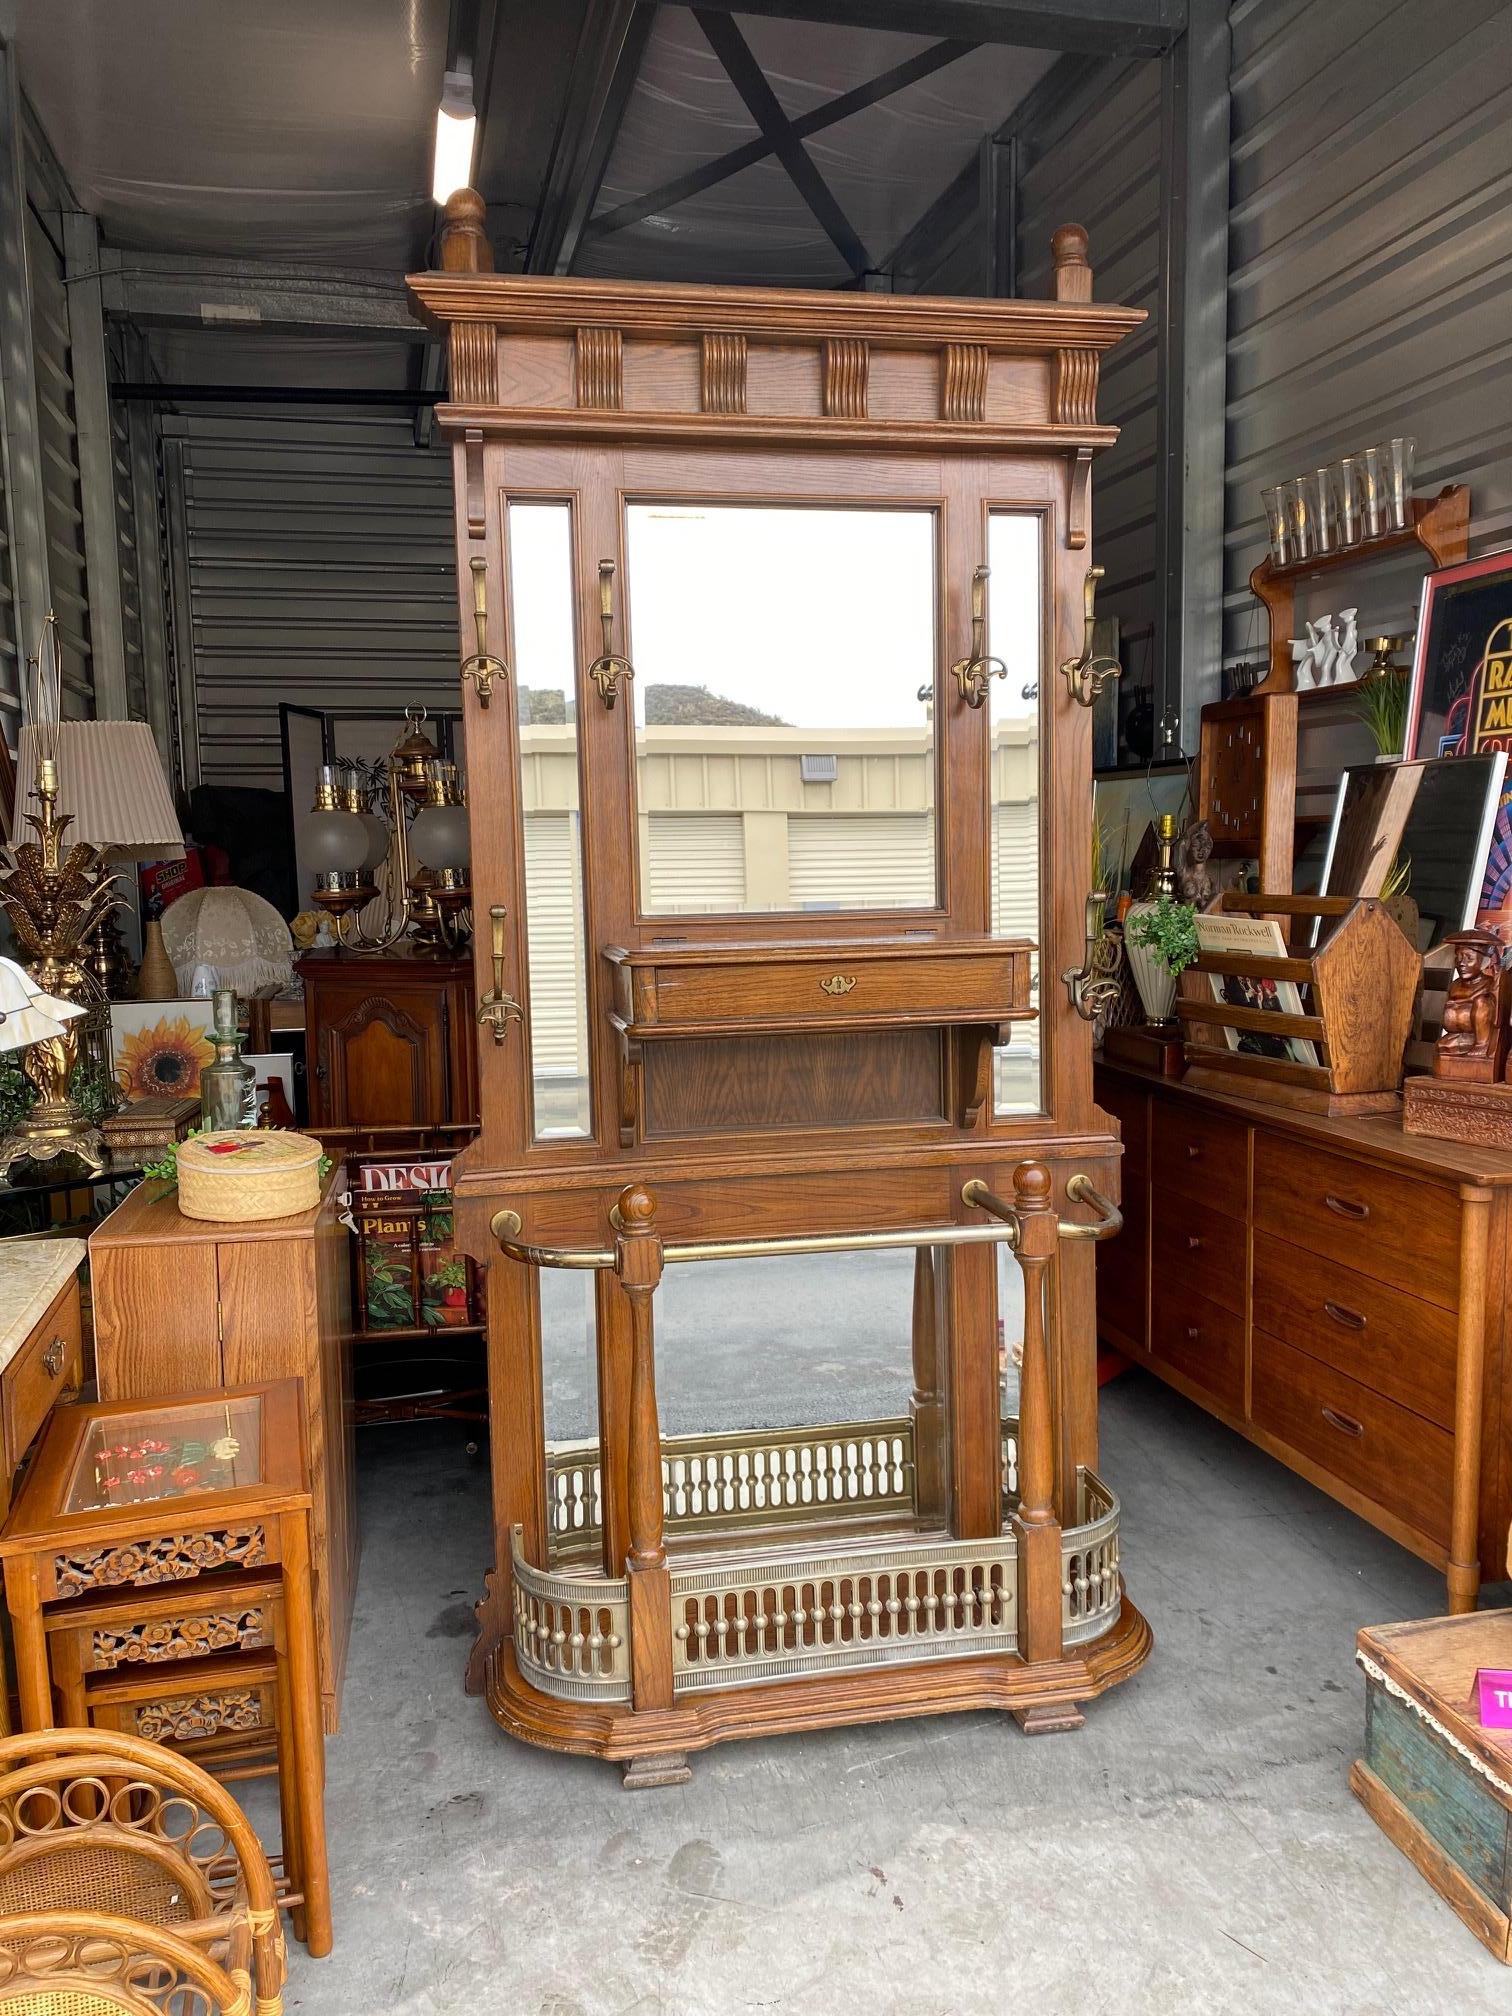 Beautiful brass and wood hall tree with mirrors. This piece is absolutely breath taking. So many nice details throughout. Storage space in the center as well as coat racks and a bottom shelf to hold additional items. The hanging hooks would work